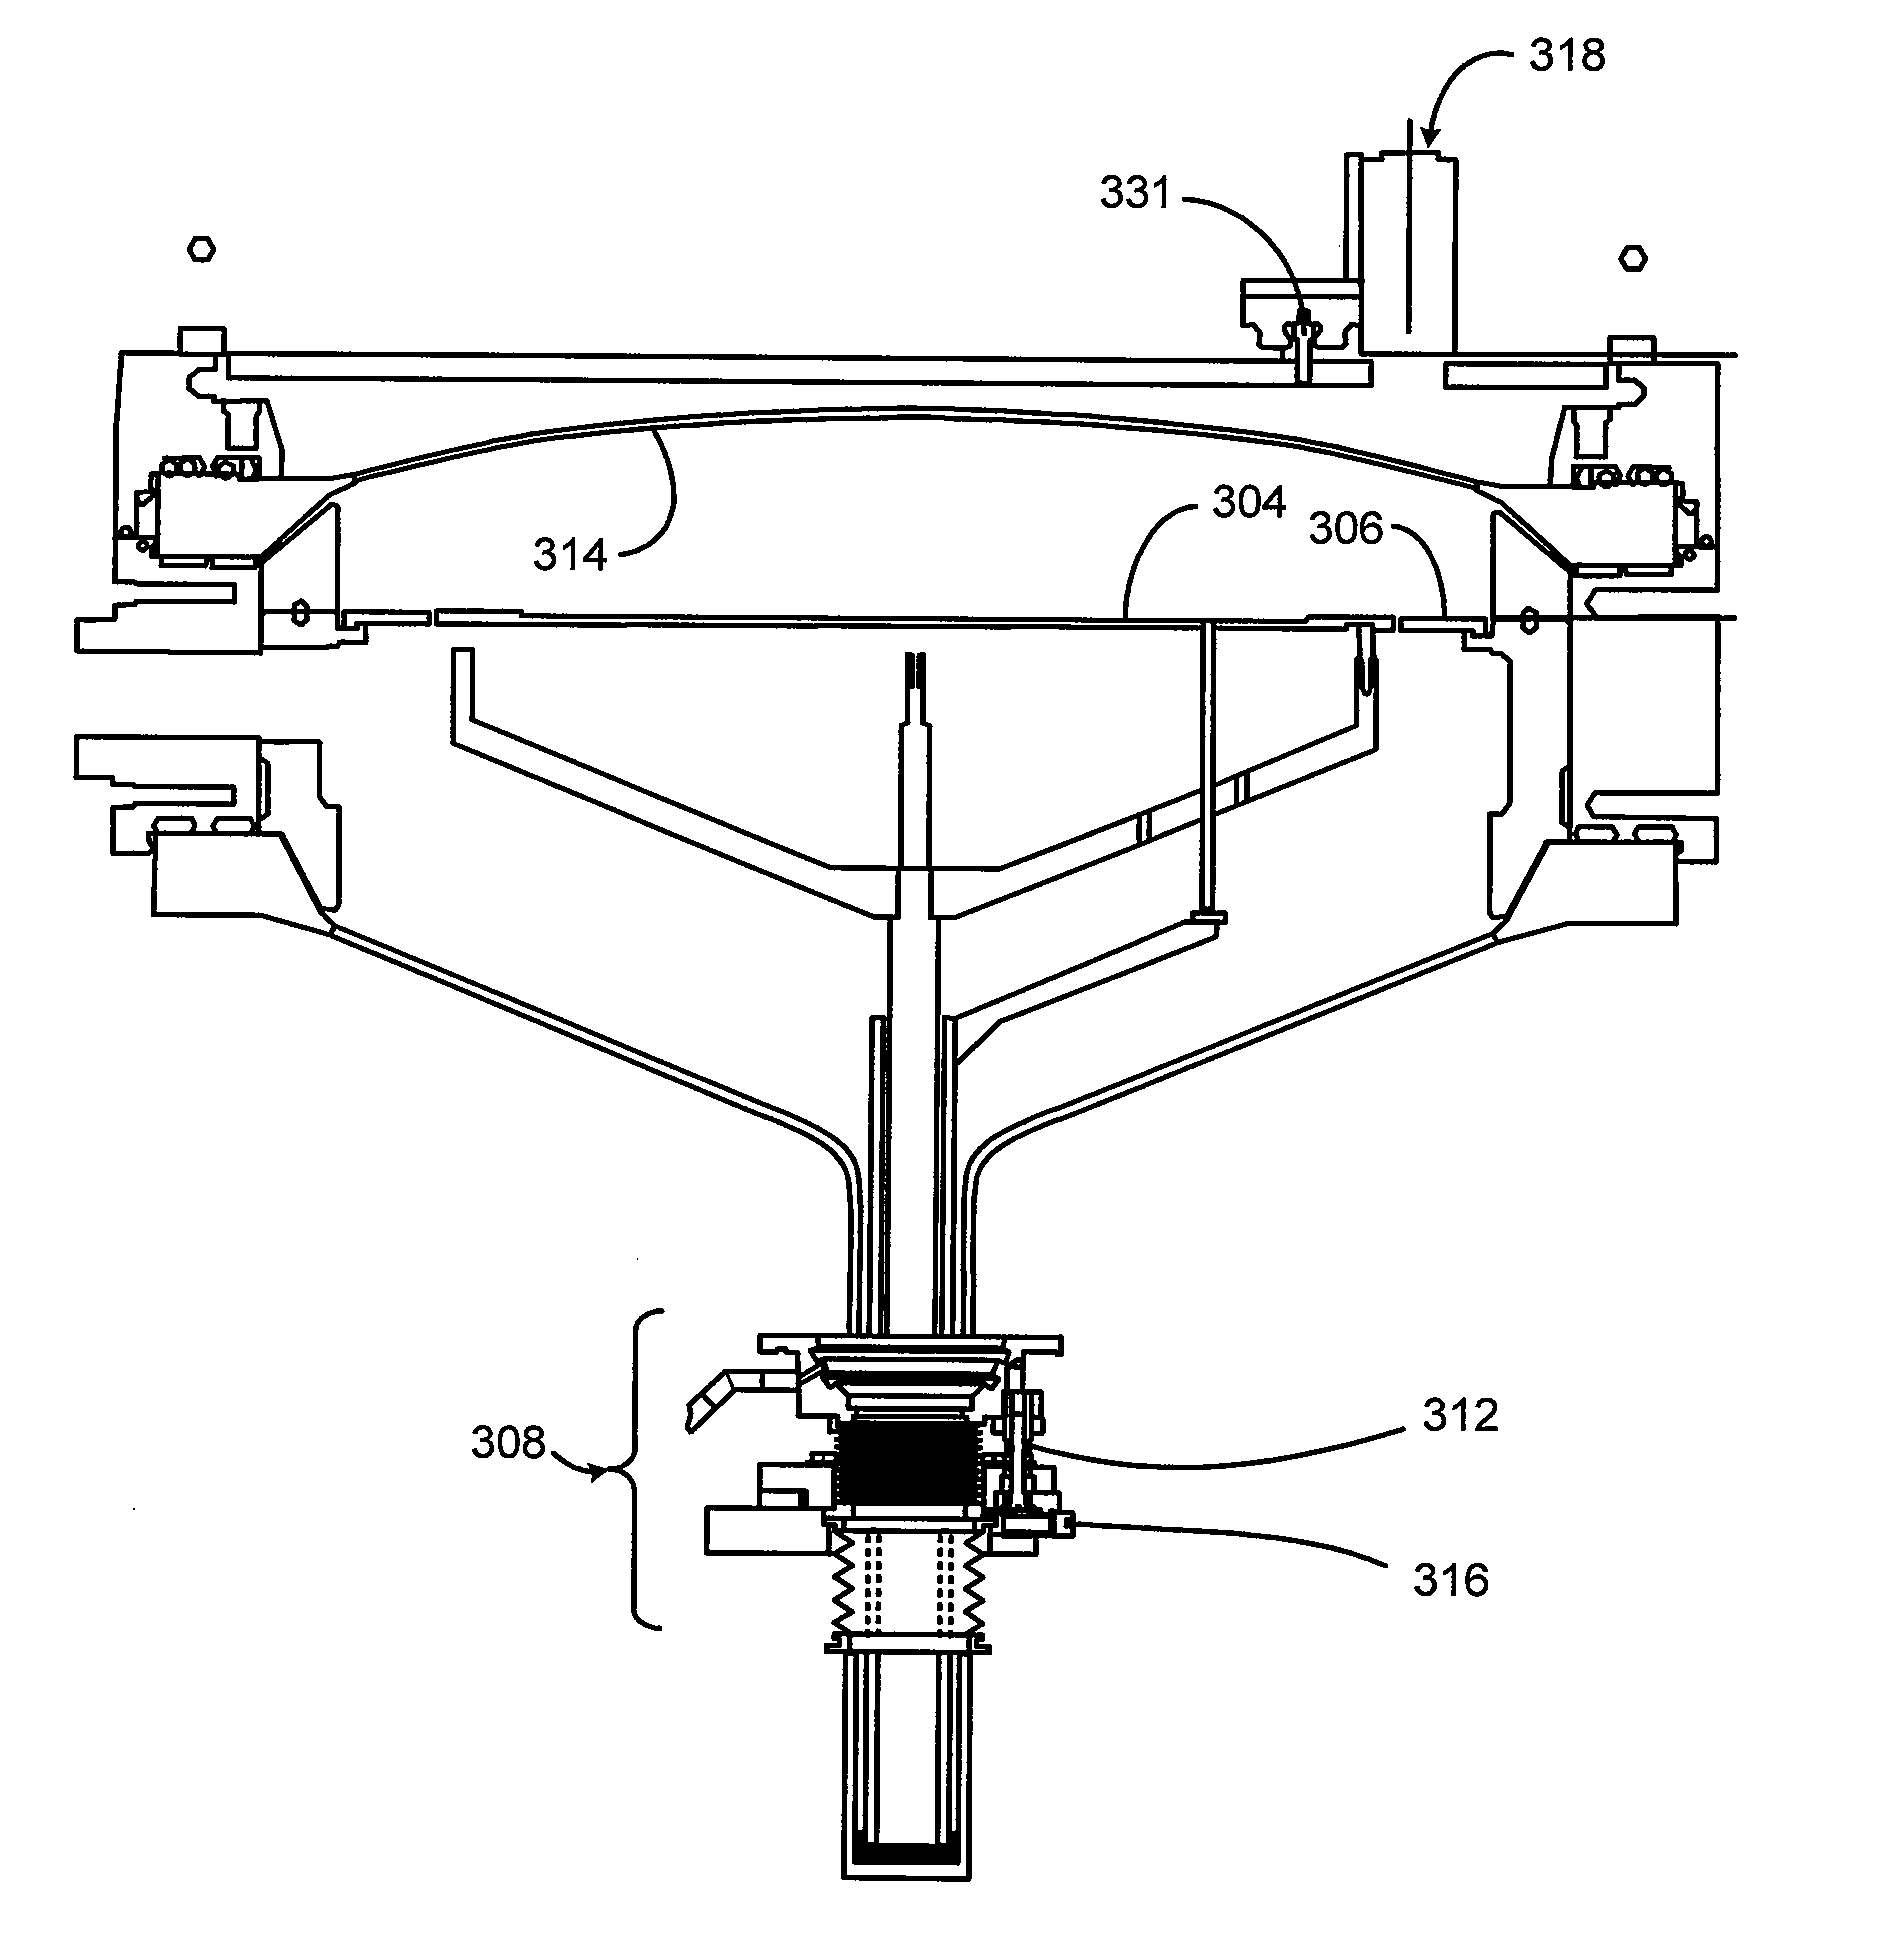 Non-contact substrate support position sensing system and corresponding adjustments